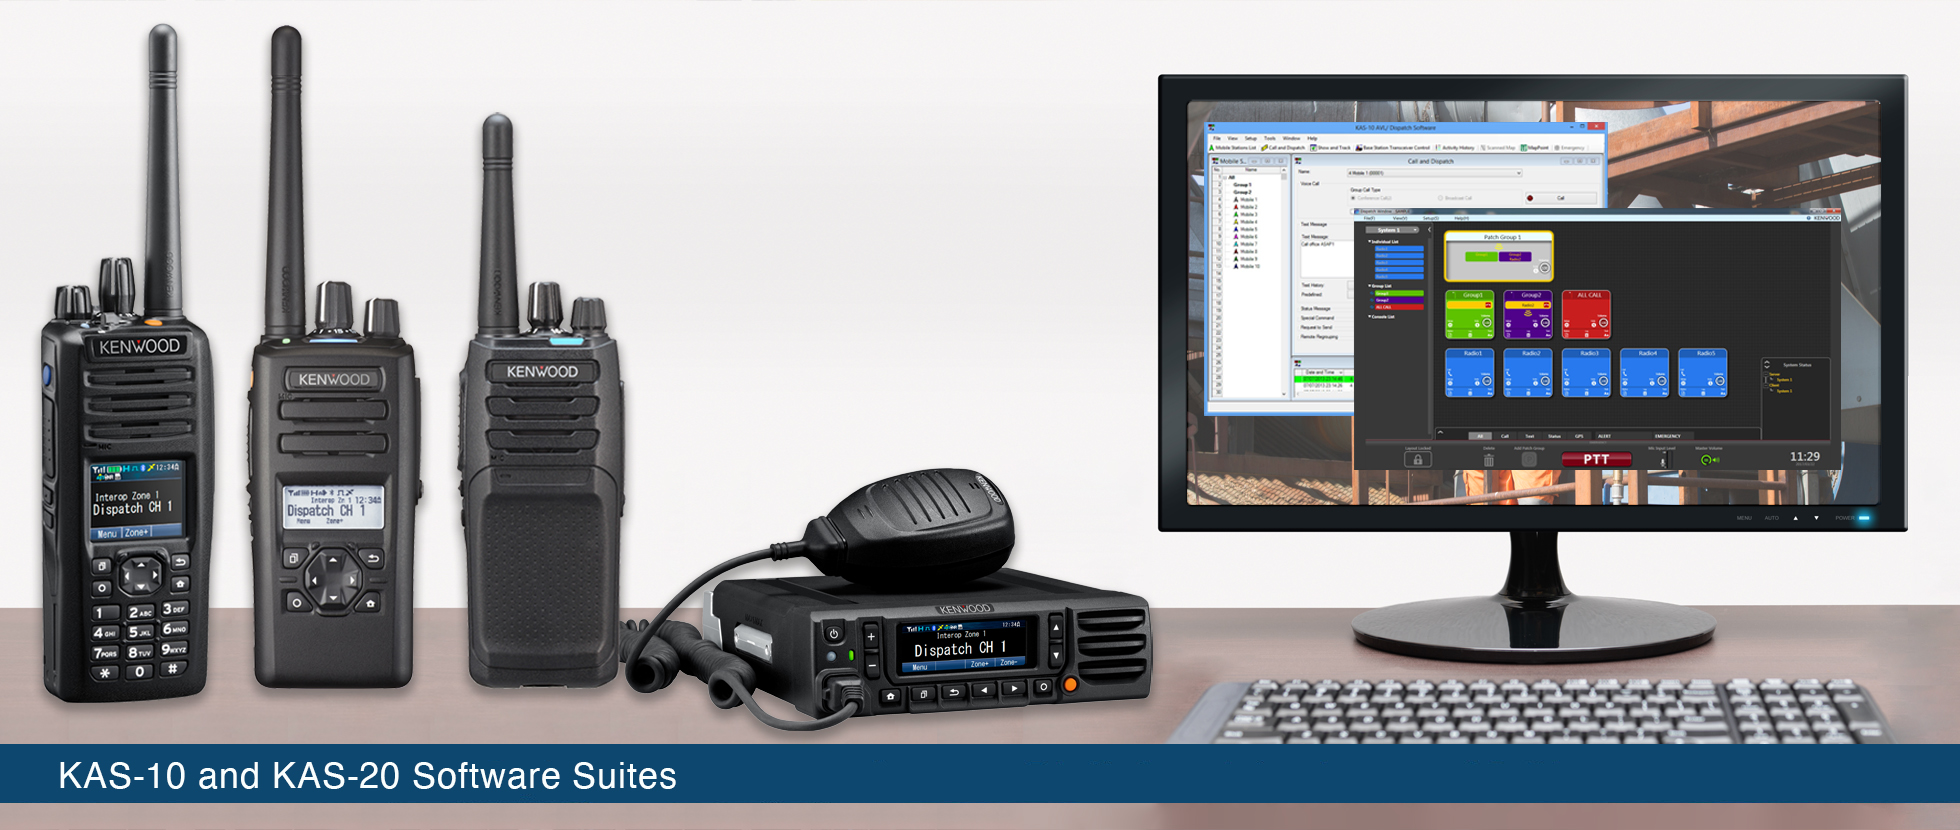 KAS-10 and KAS-20 software suites